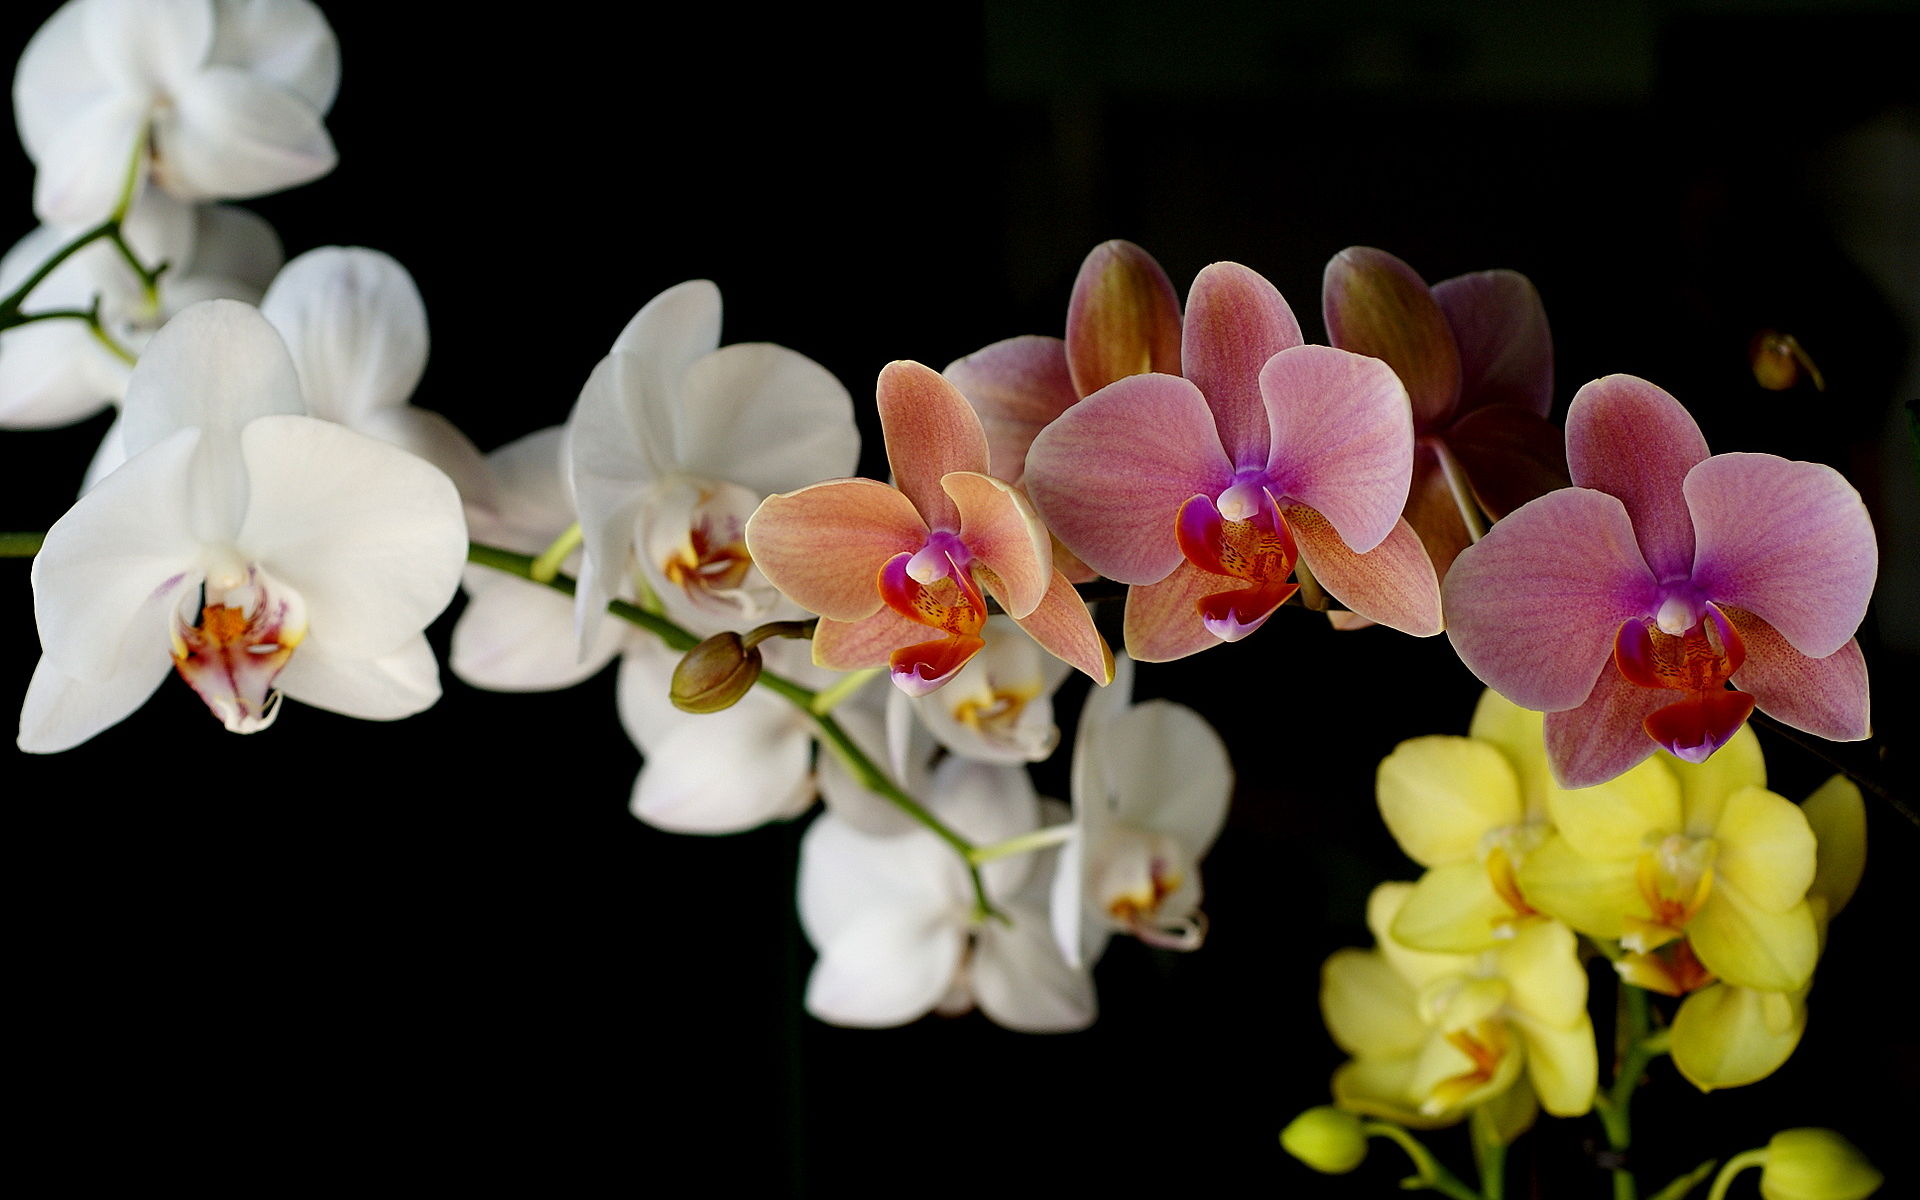 you may ask, wondering, “I just thought orchids were flowers.” While they are flowering plants, there's so much more that makes them really incredible.